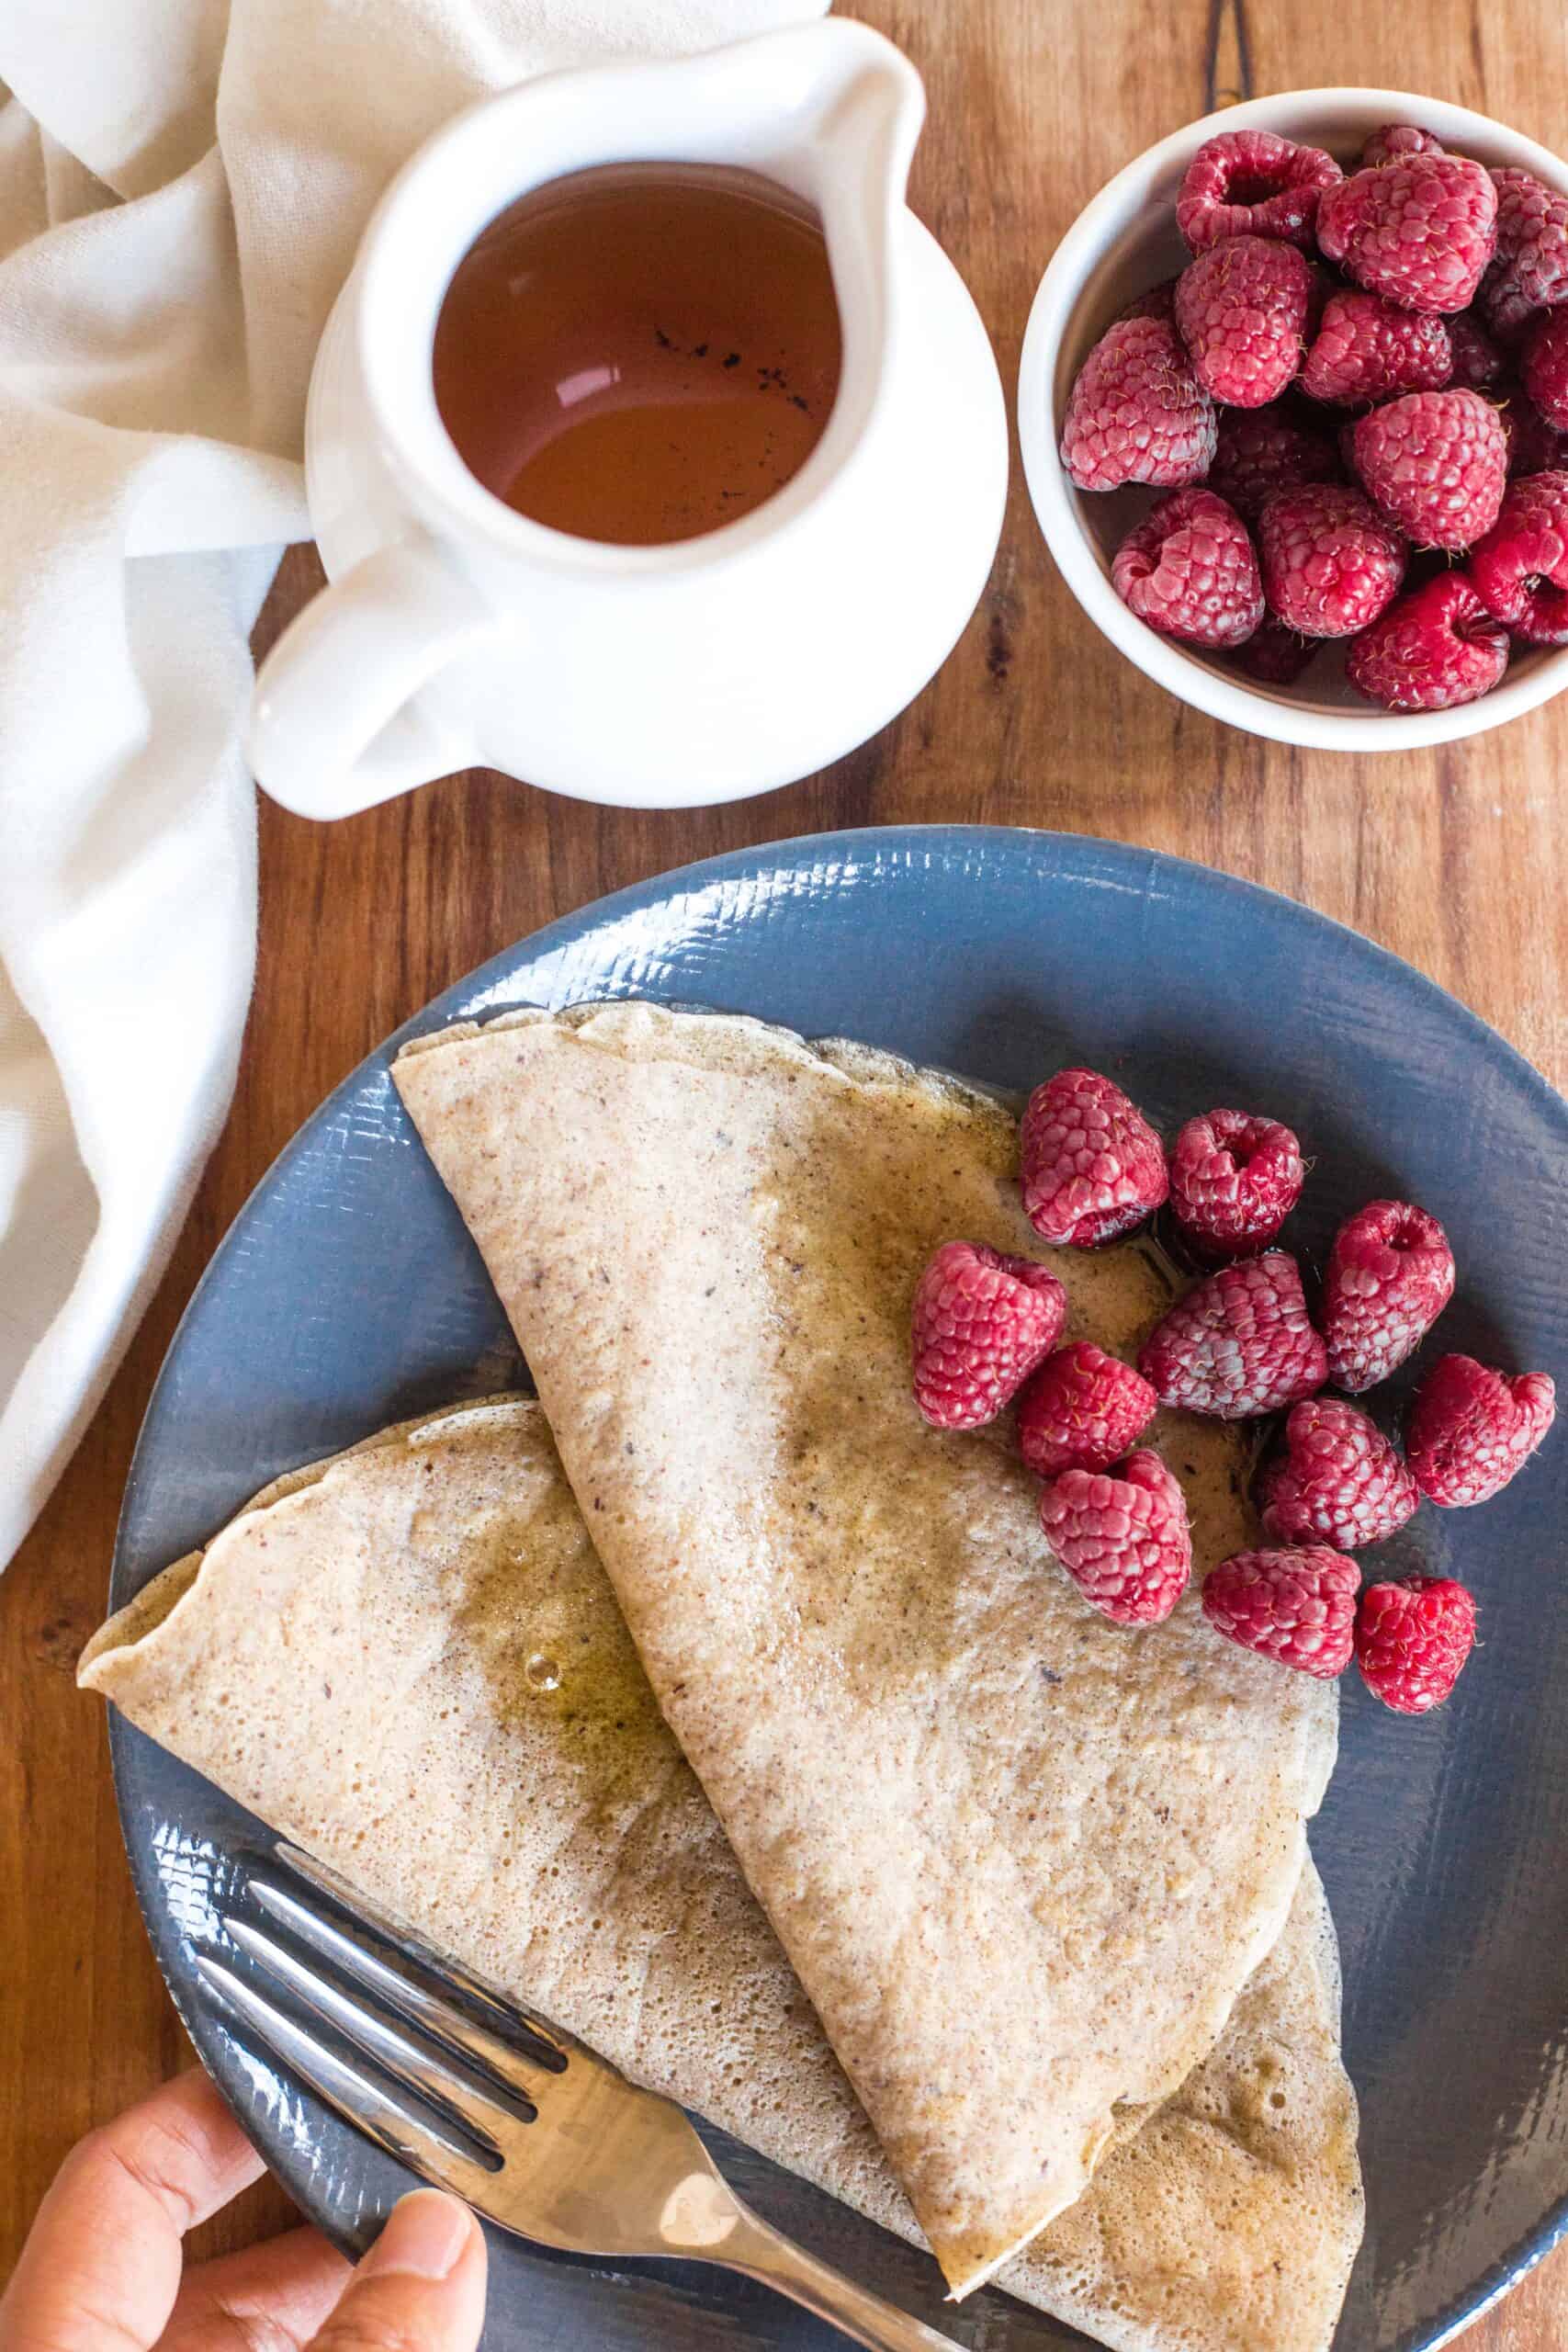 Holding a plate with millet crepes and raspberries.